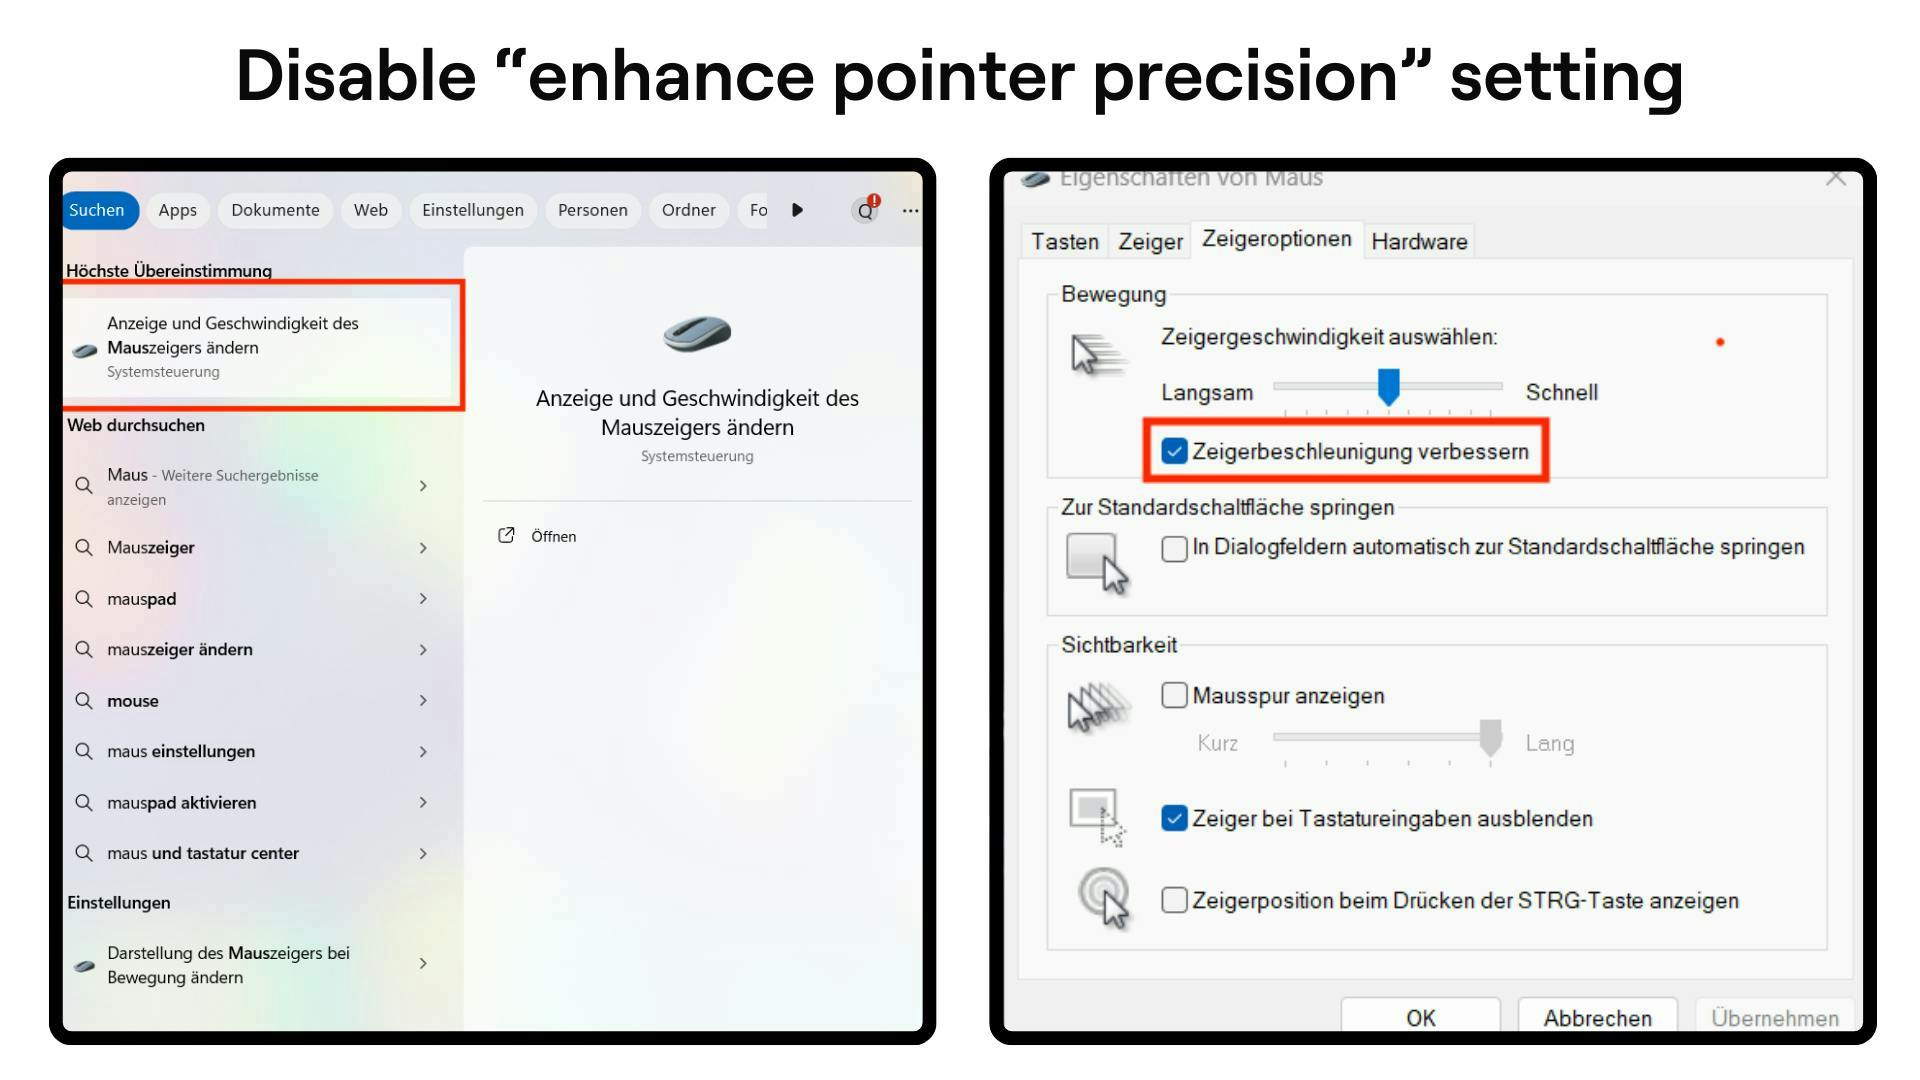 This is how to disable the "Enhance Pointer Precision" option in Windows settings. | Credit: LeetDesk.